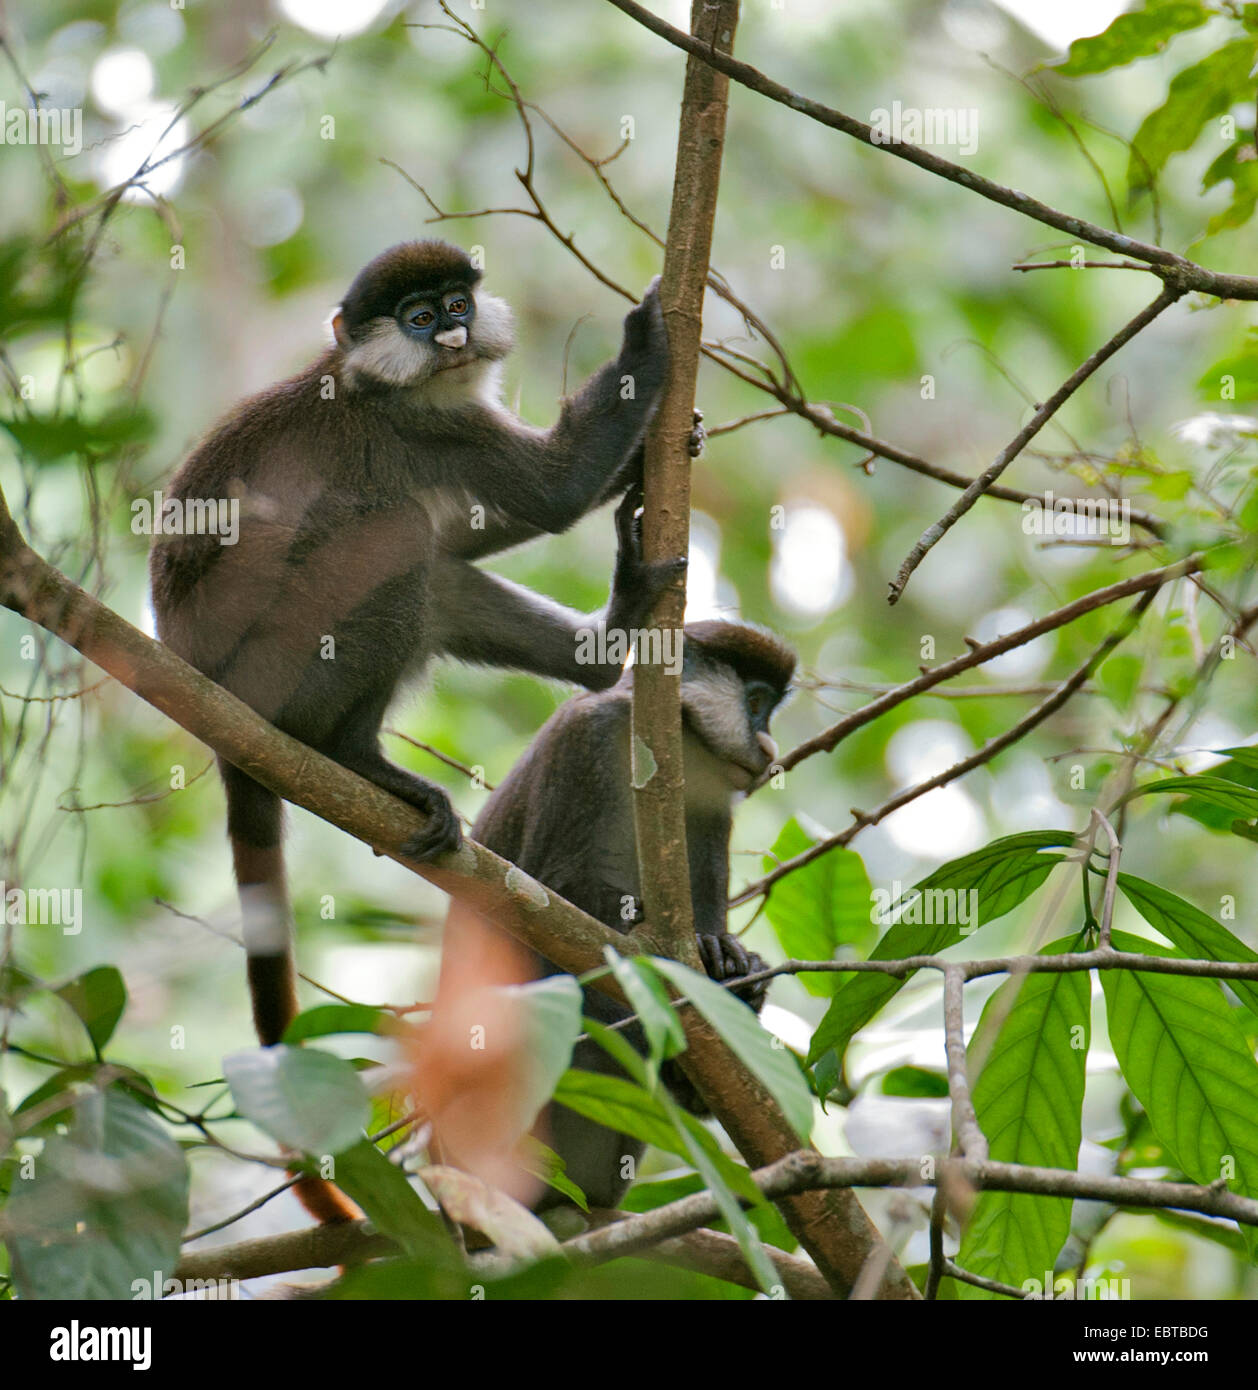 black-cheeked white-nosed monkey, Schmidt's guenon, red-tailed monkey (Cercopithecus ascanius), two red-tailed monkeys sitting on branches, Uganda, Kibale Forest National Park Stock Photo